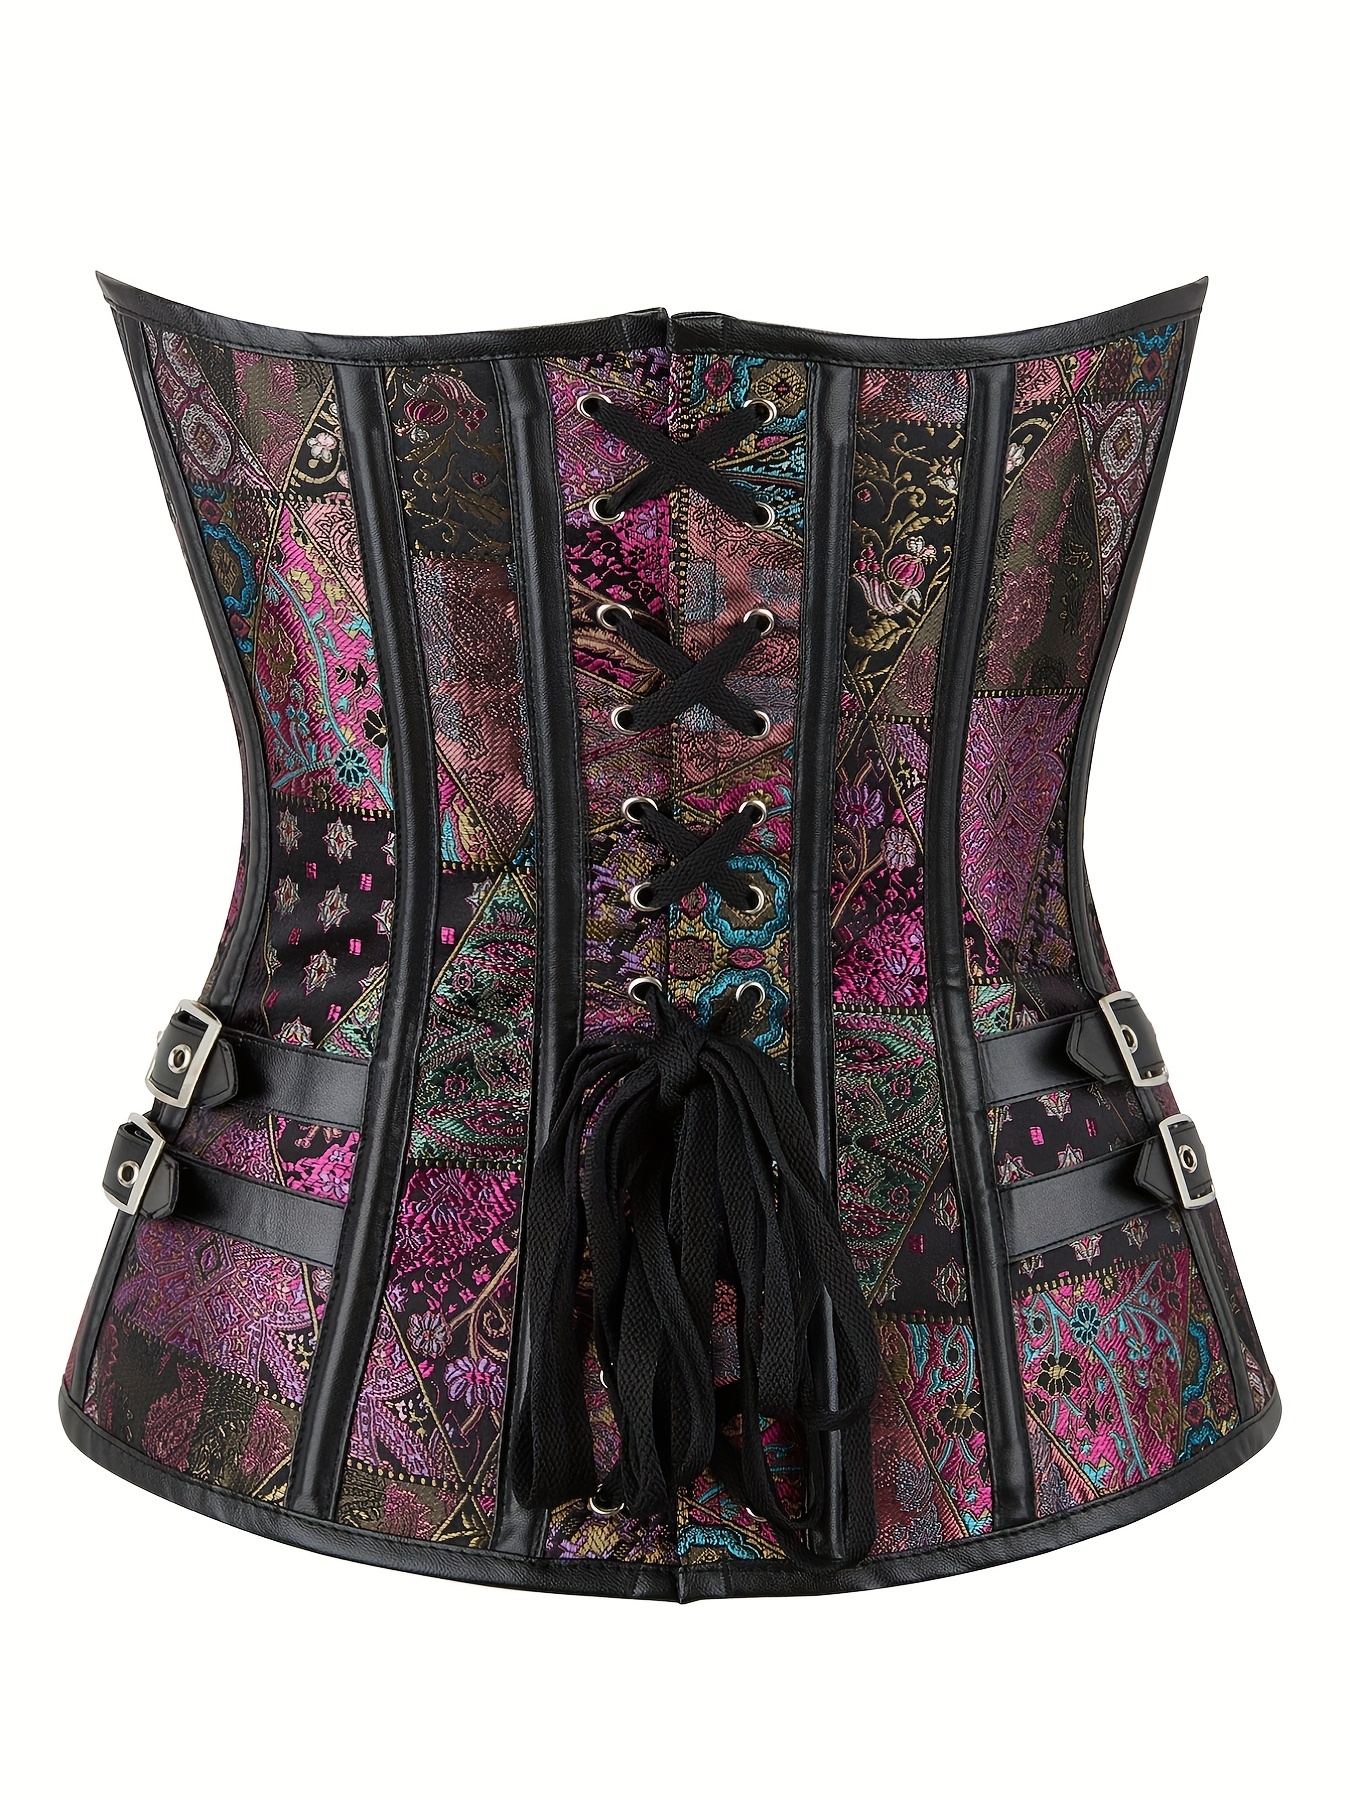 Opera Lace Adjustable Corset with Removable Garter